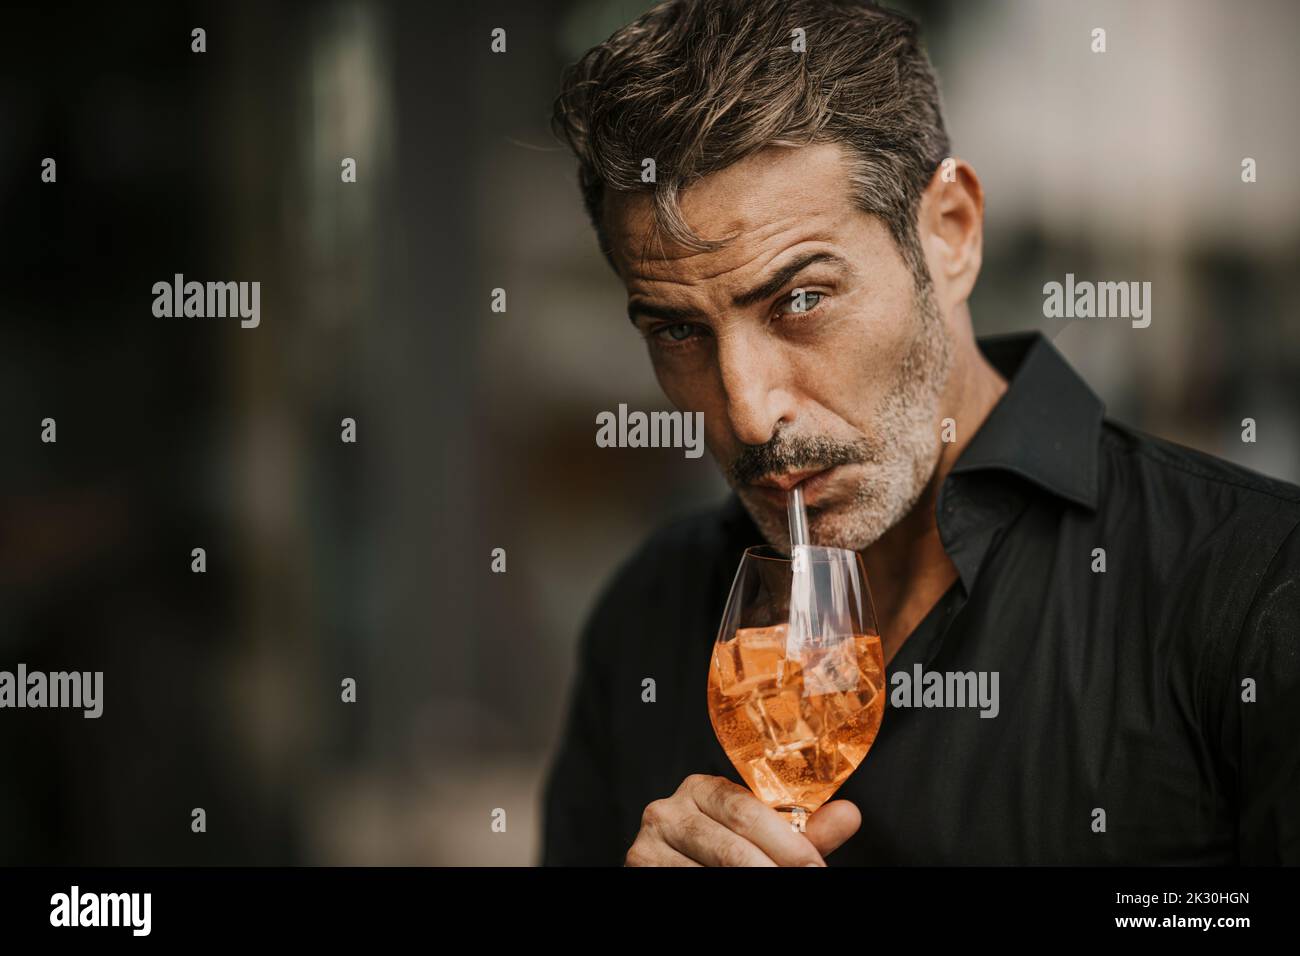 Handsome mature man drinking with straw Stock Photo